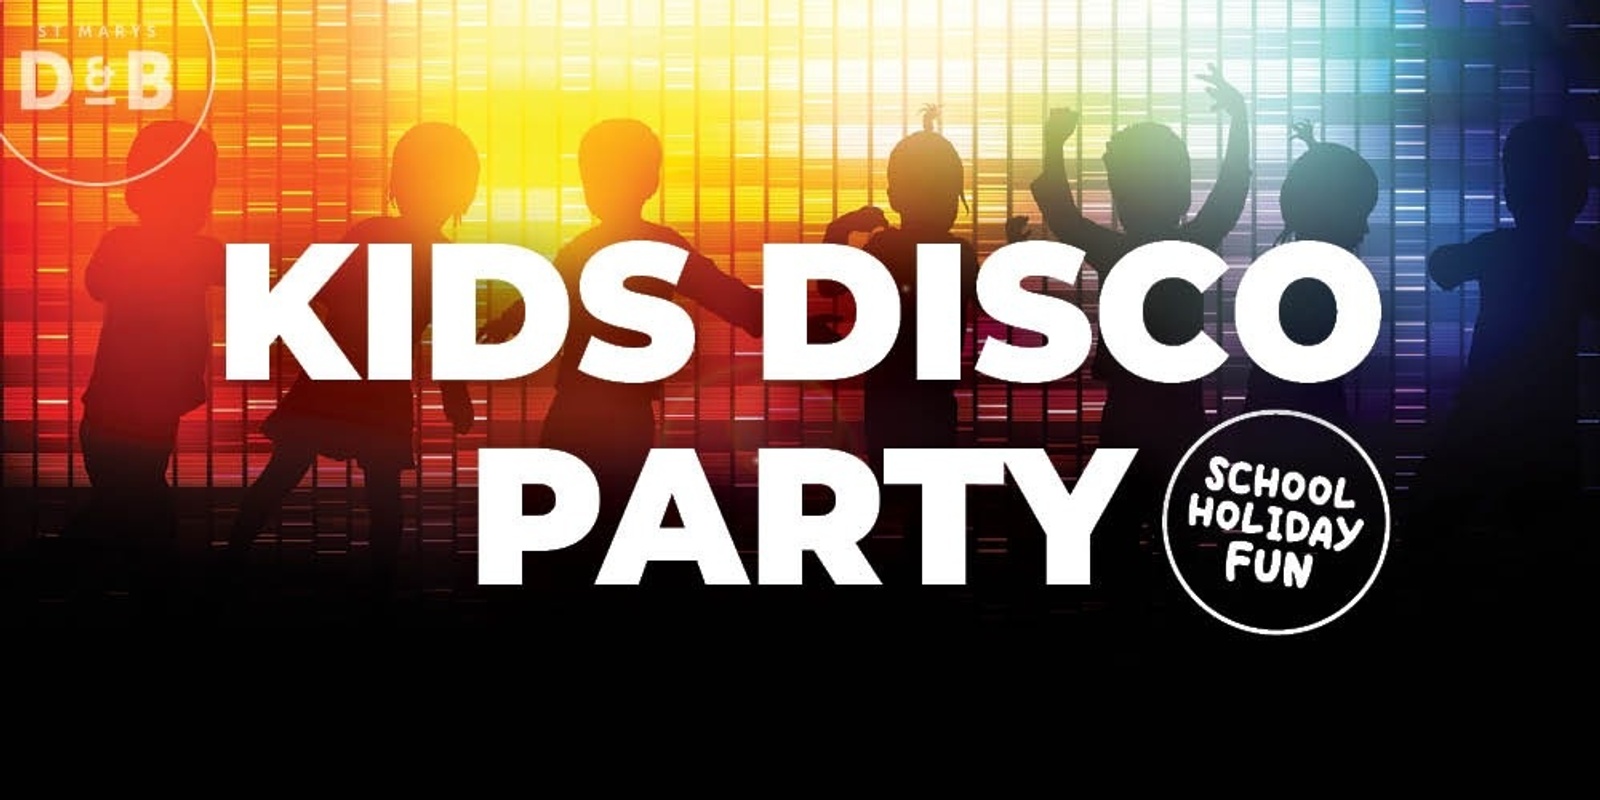 Banner image for SCHOOL HOLIDAY FUN - KIDS DISCO PARTY